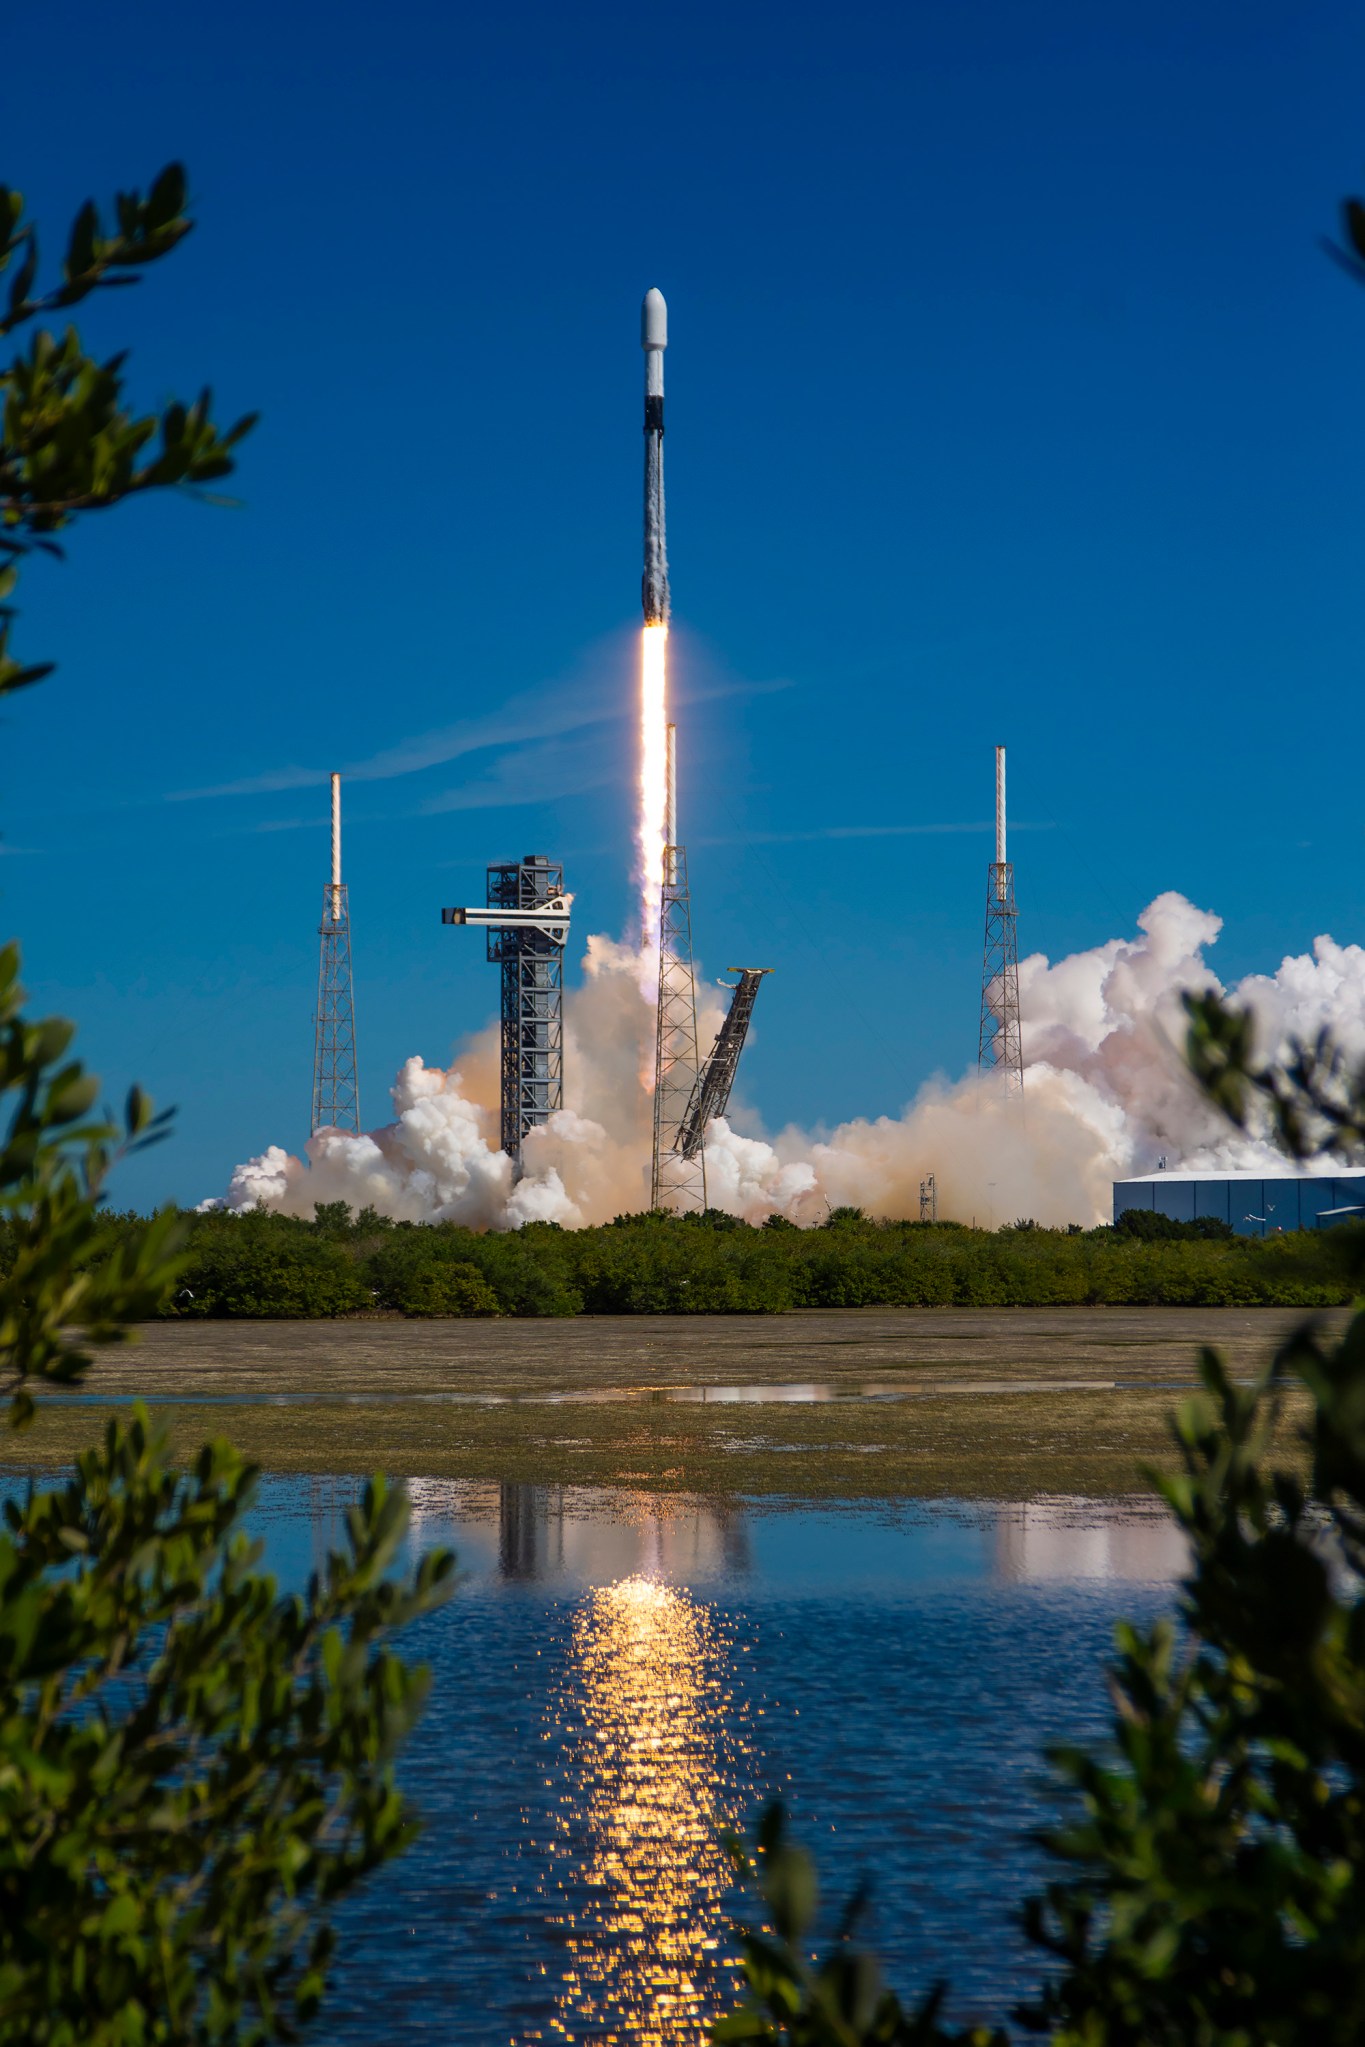 A black and white rocket takes off against the brilliant blue backdrop of the sky. It leaves a trail of fire and billowing clouds of white smoke behind it, which partially obscures some structures around the launchpad. The light reflects on the mirror-like surface of a nearby body of water. The image is delicately framed on the left, right, and bottom by green leaves.